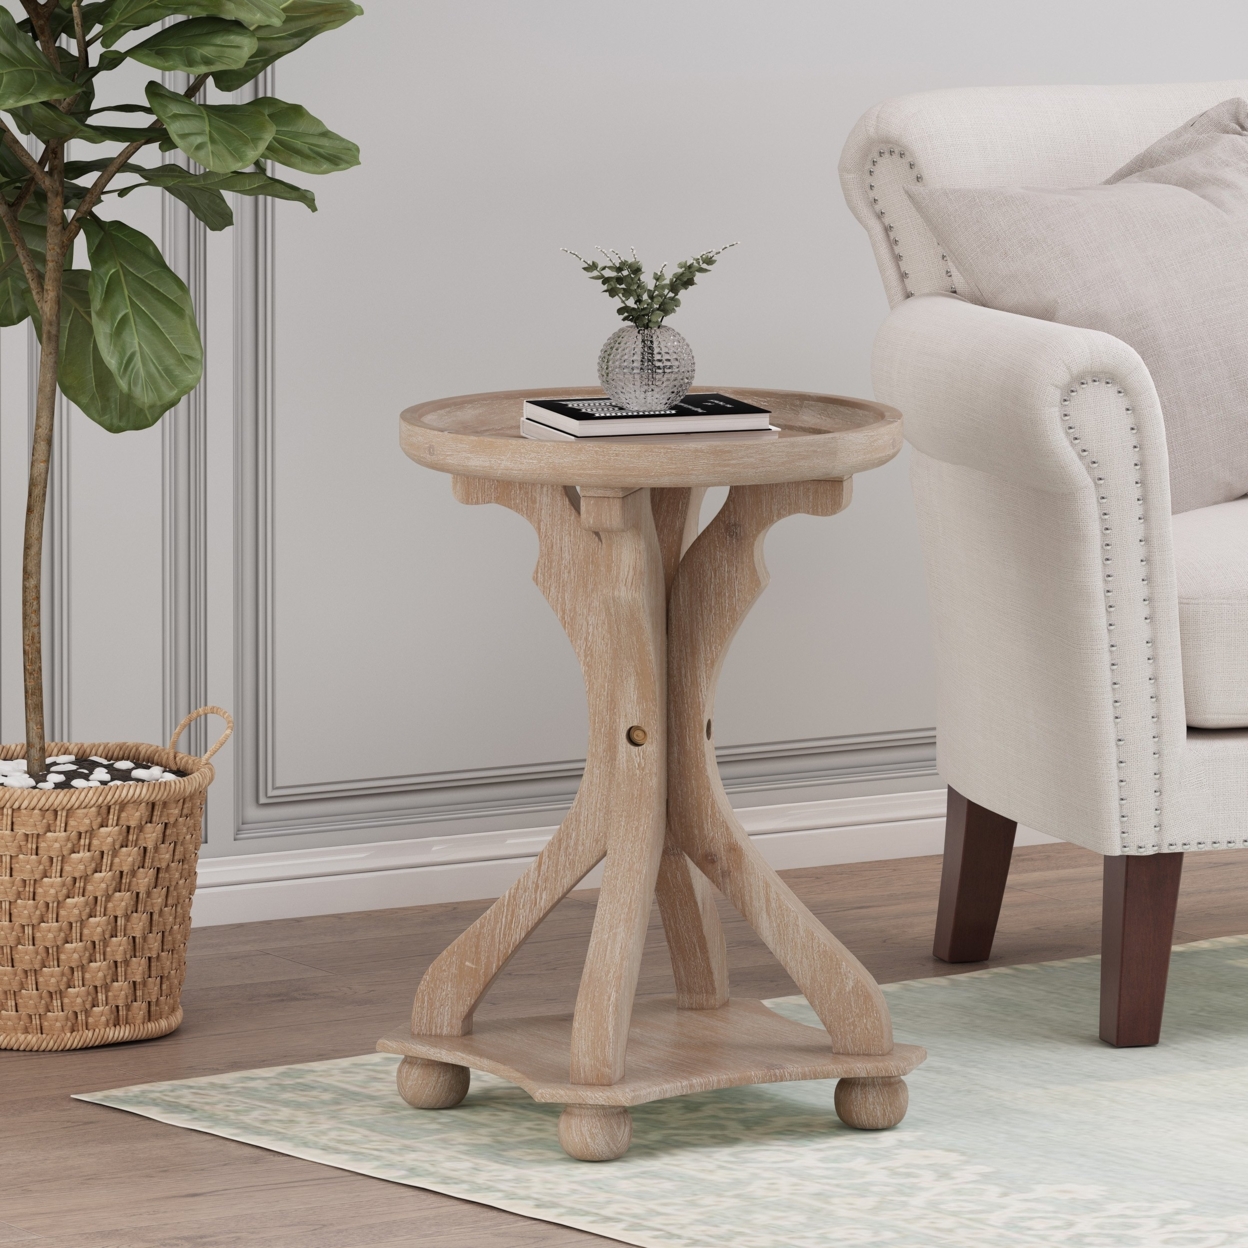 Ihana French Country Accent Table With Round Top - Natural